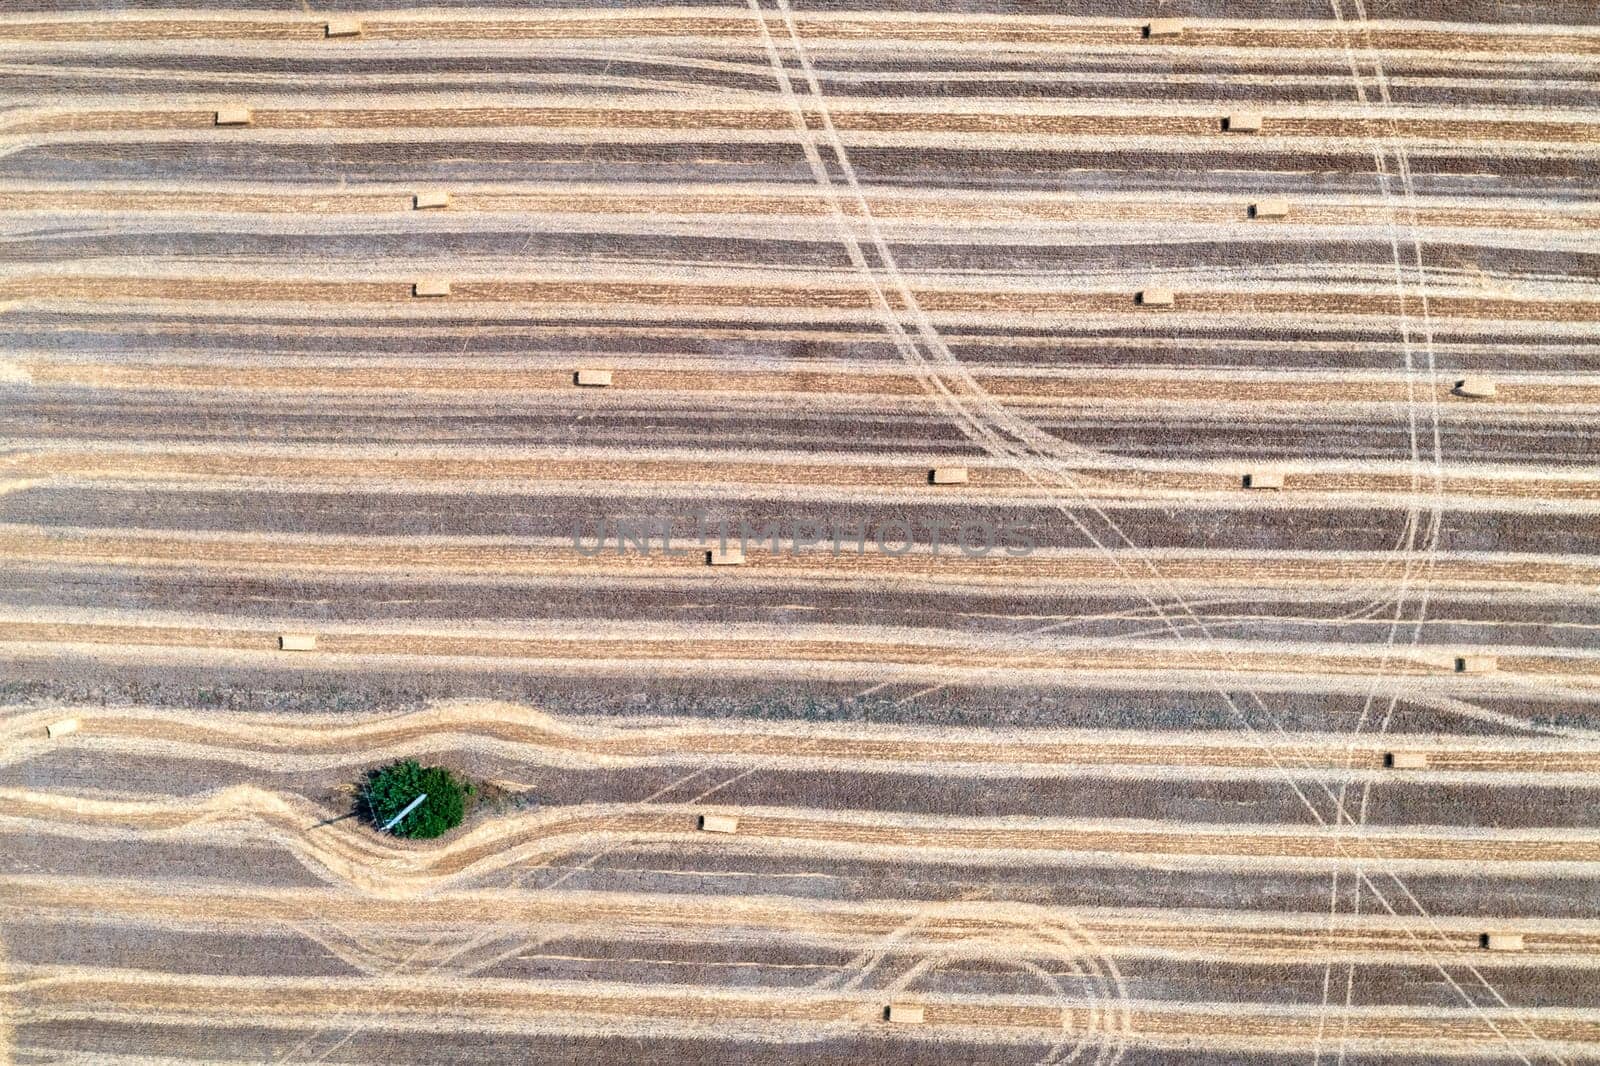 aerial view of a lonely tree in the agricultural field after harvest.  by EdVal